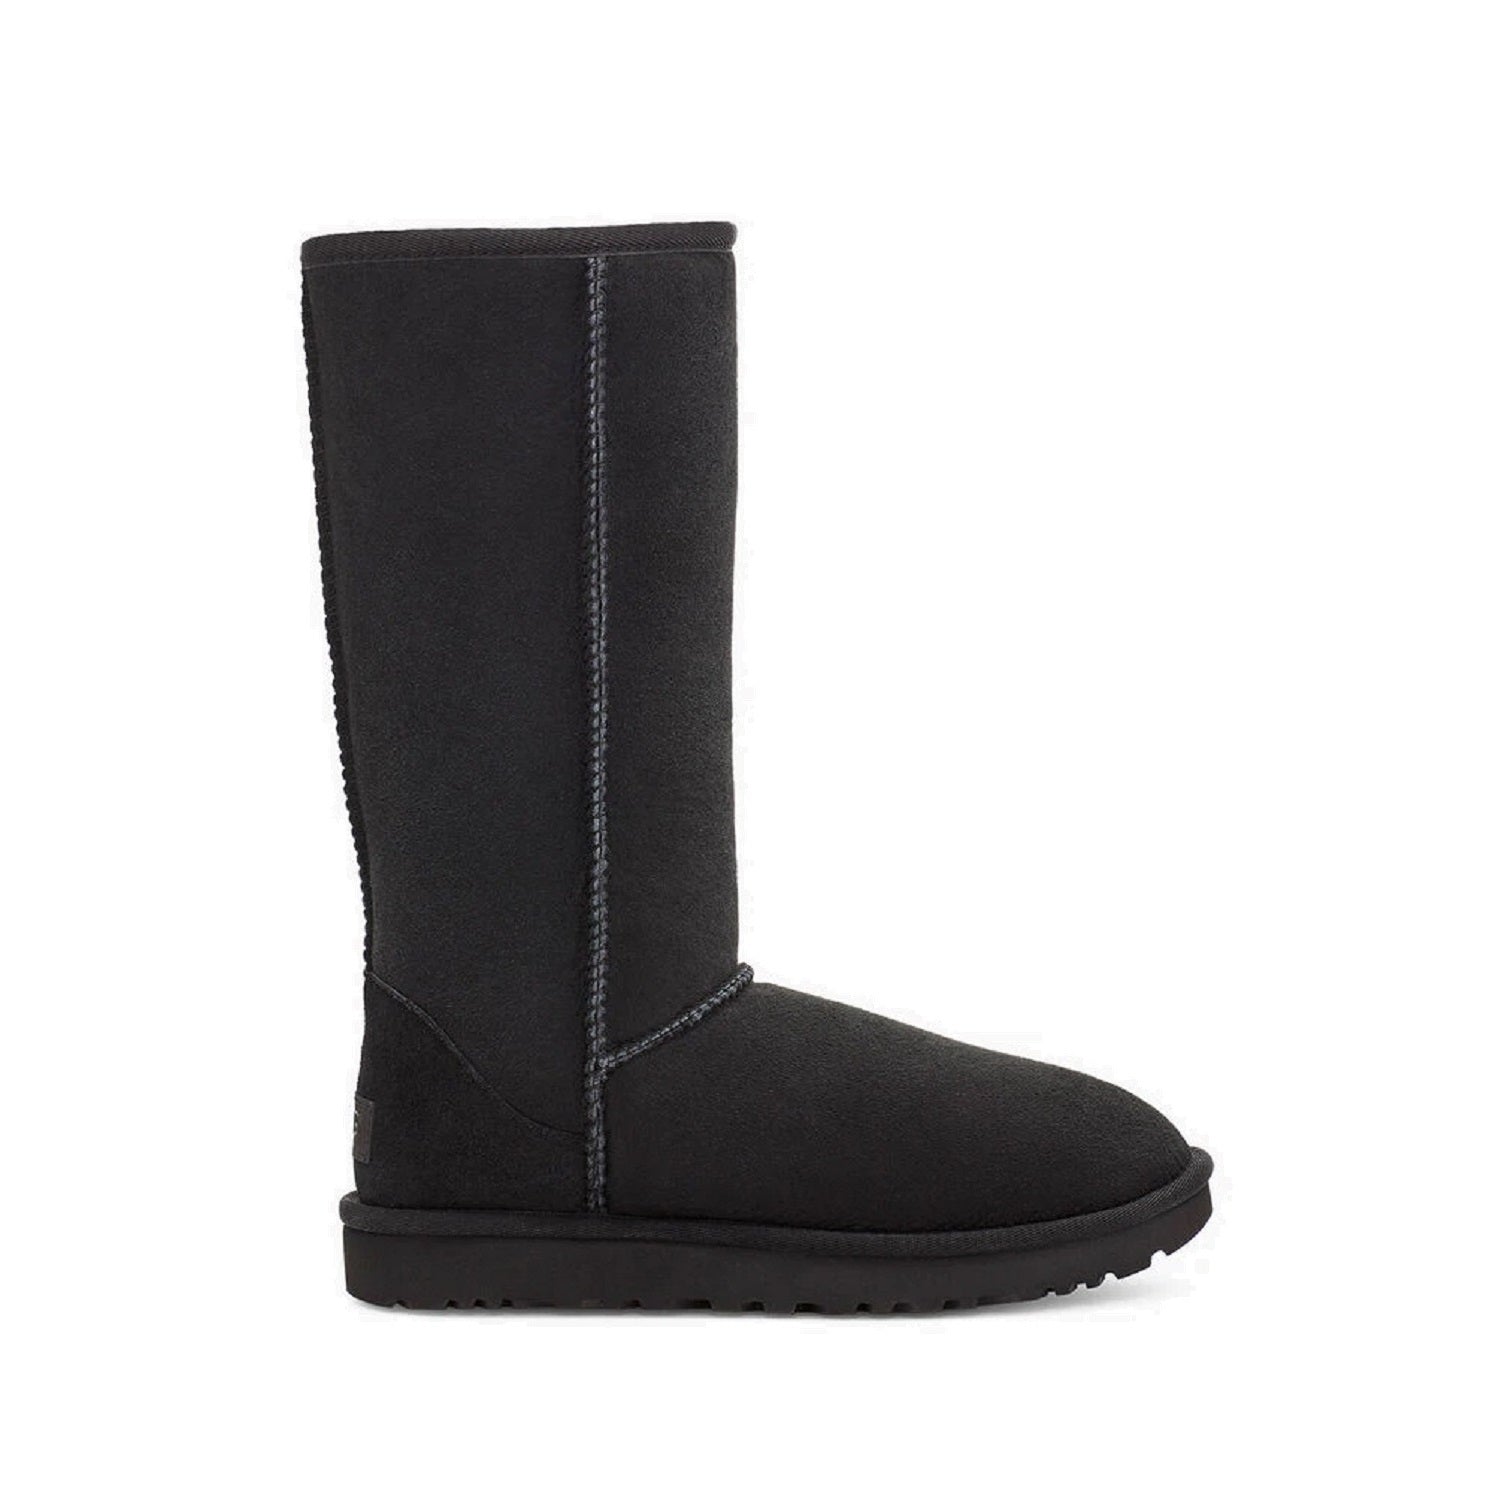 Classic tall Ugg boot in black.